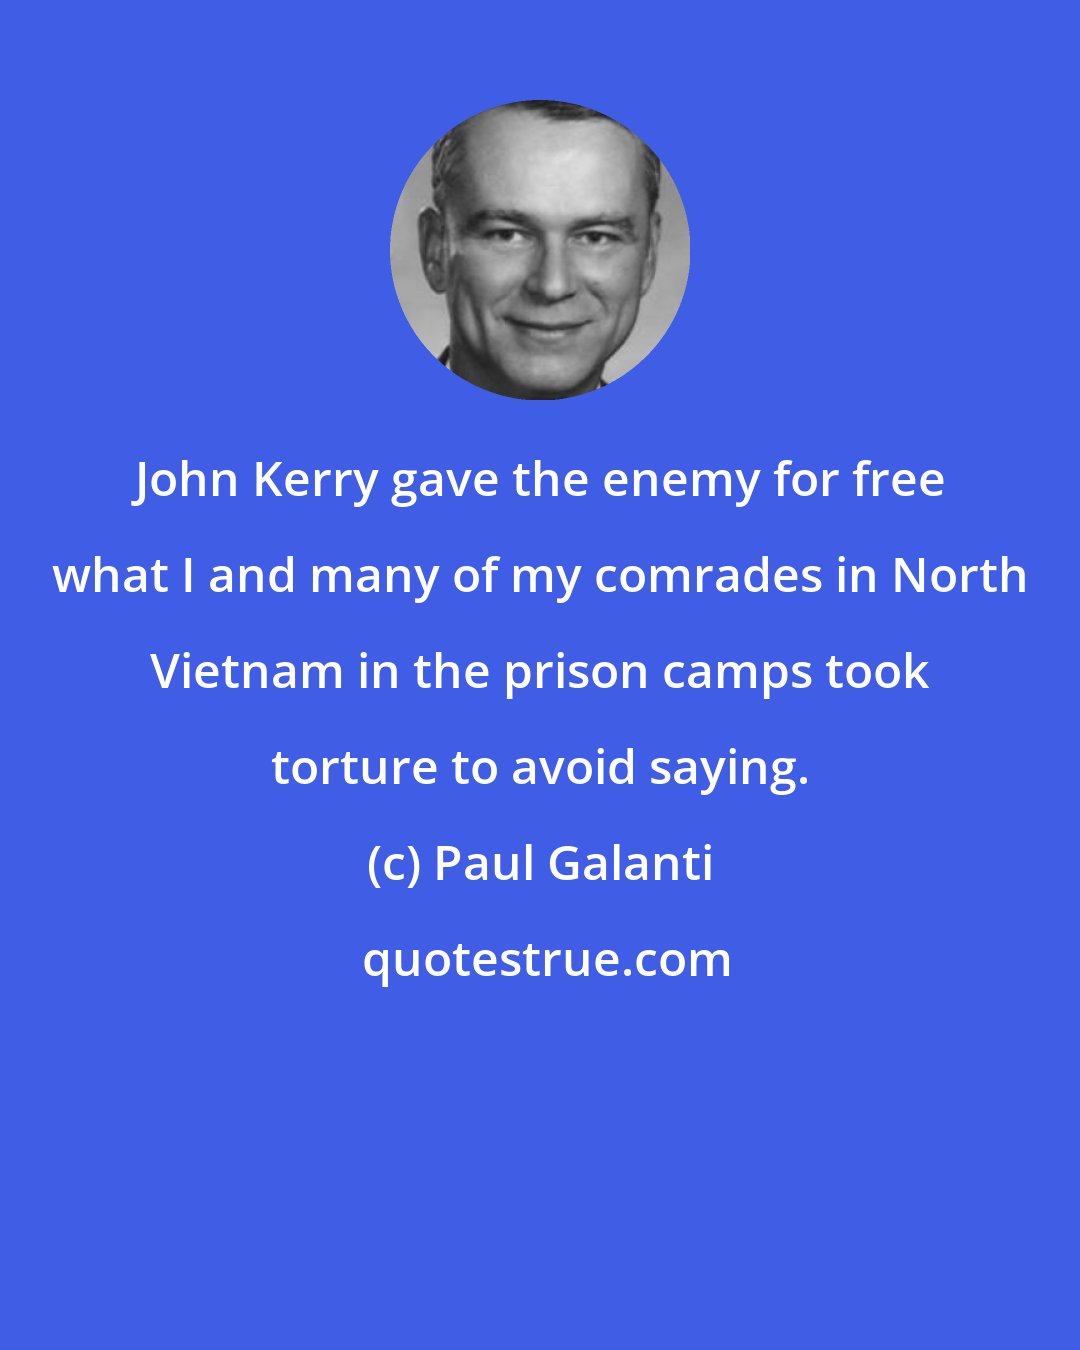 Paul Galanti: John Kerry gave the enemy for free what I and many of my comrades in North Vietnam in the prison camps took torture to avoid saying.